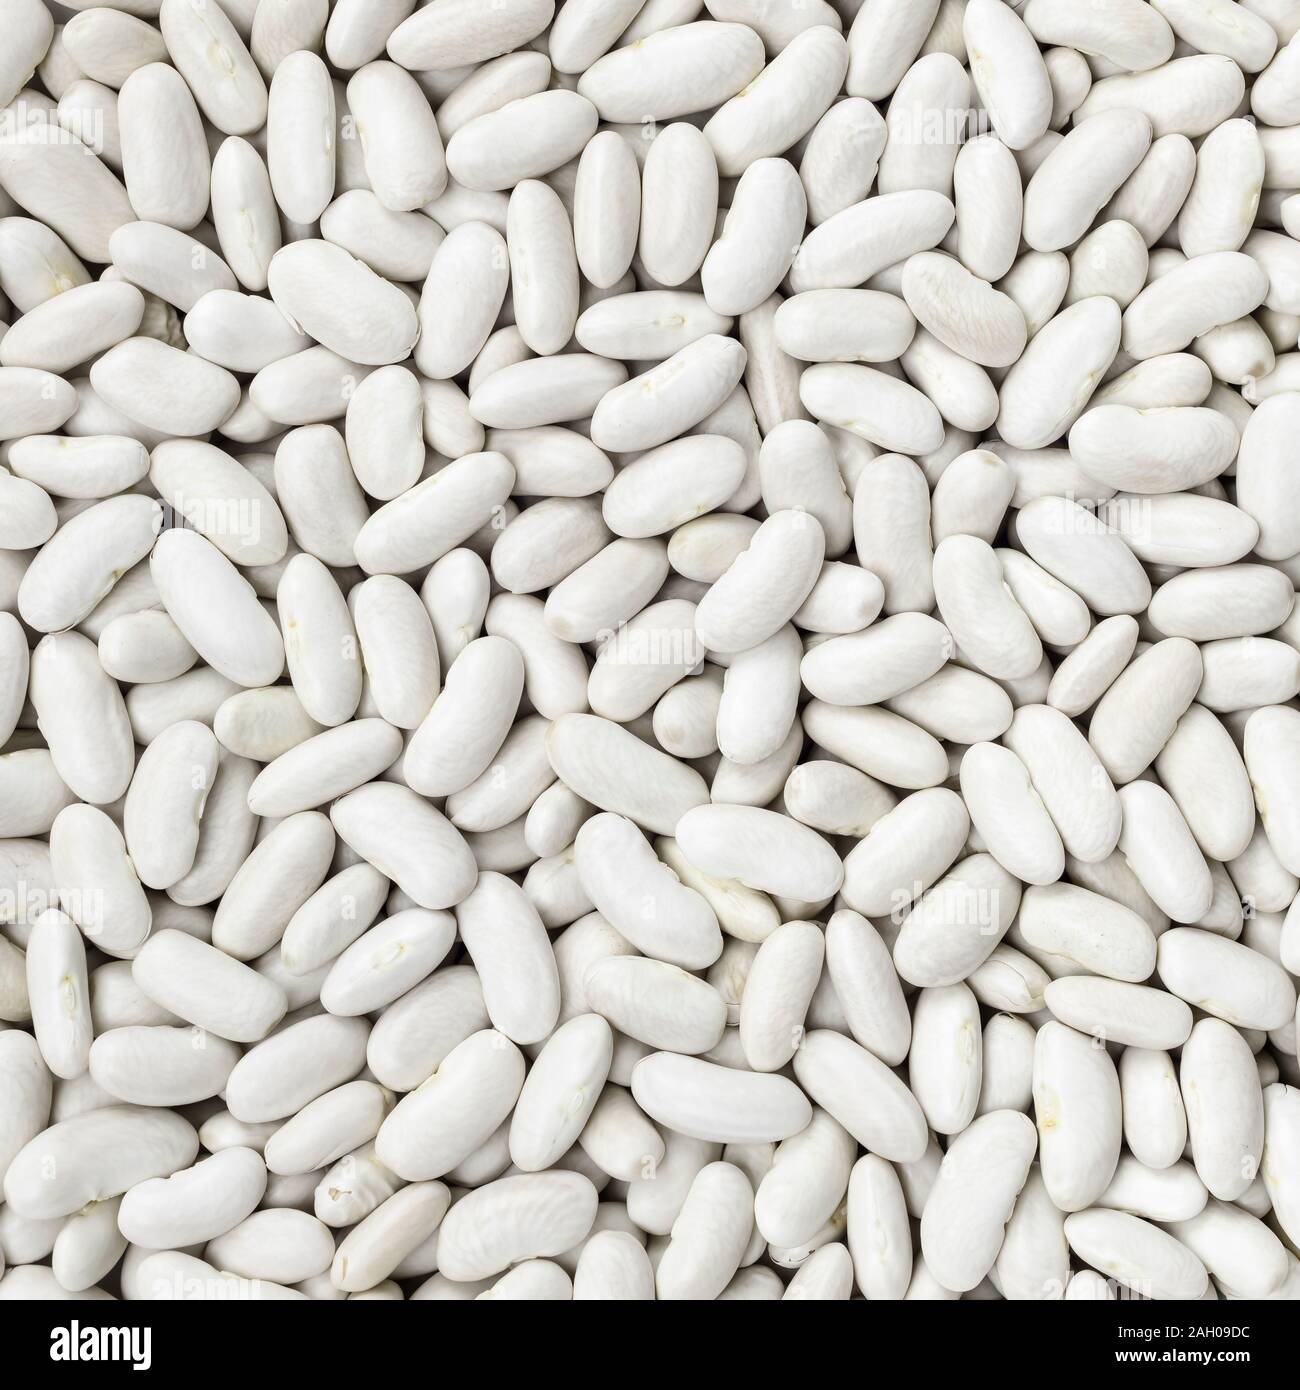 Navy, haricot, white pea, white kidney or Cannellini beans texture background or pattern. Raw legume food. Stock Photo